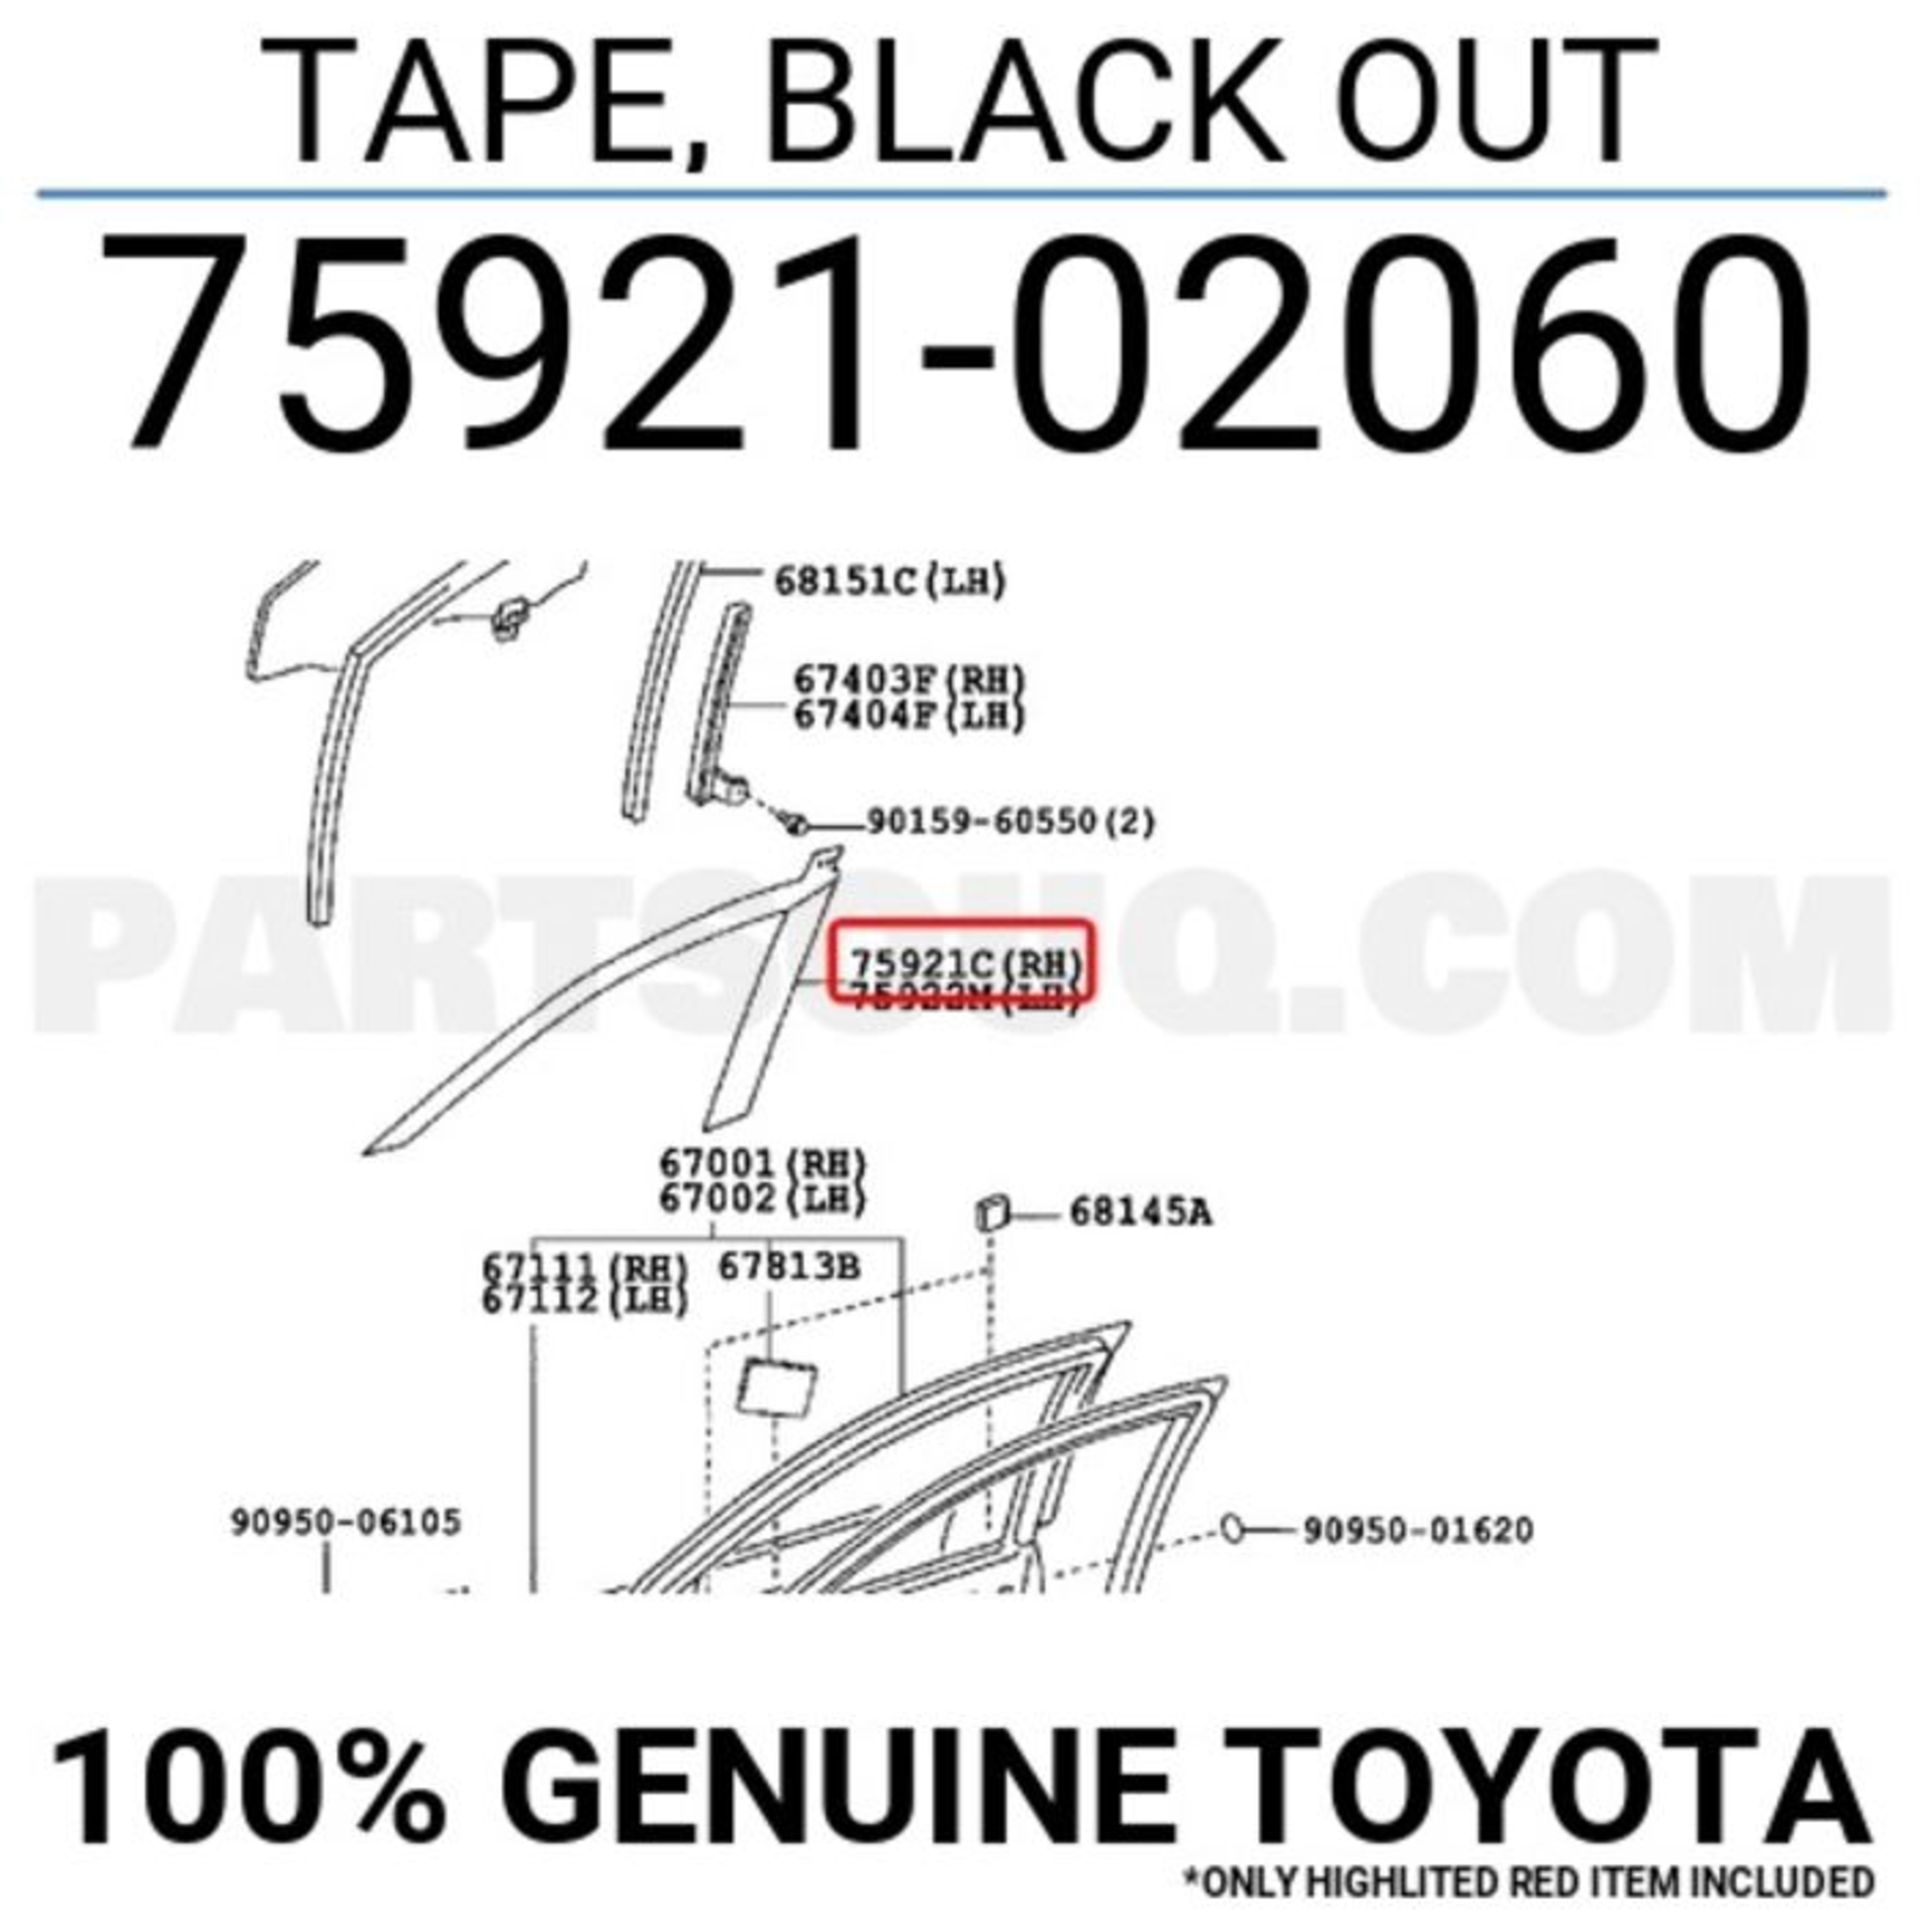 1 X BOX TO CONTAIN 12 STRIPS OF TOYOTA REAR WINDOW BLACK OUT TAPE / AS NEW - Image 2 of 3